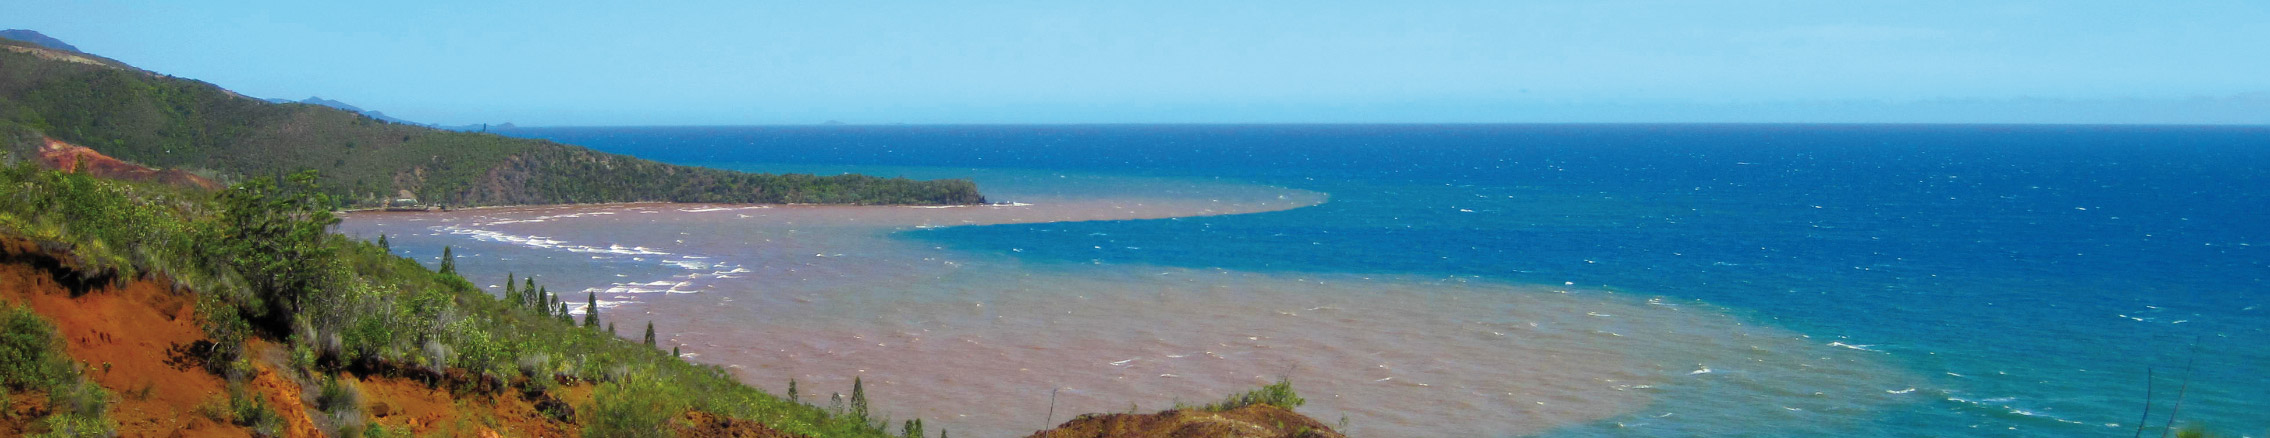 Monitoring a marine effluent outfall in New Caledonia